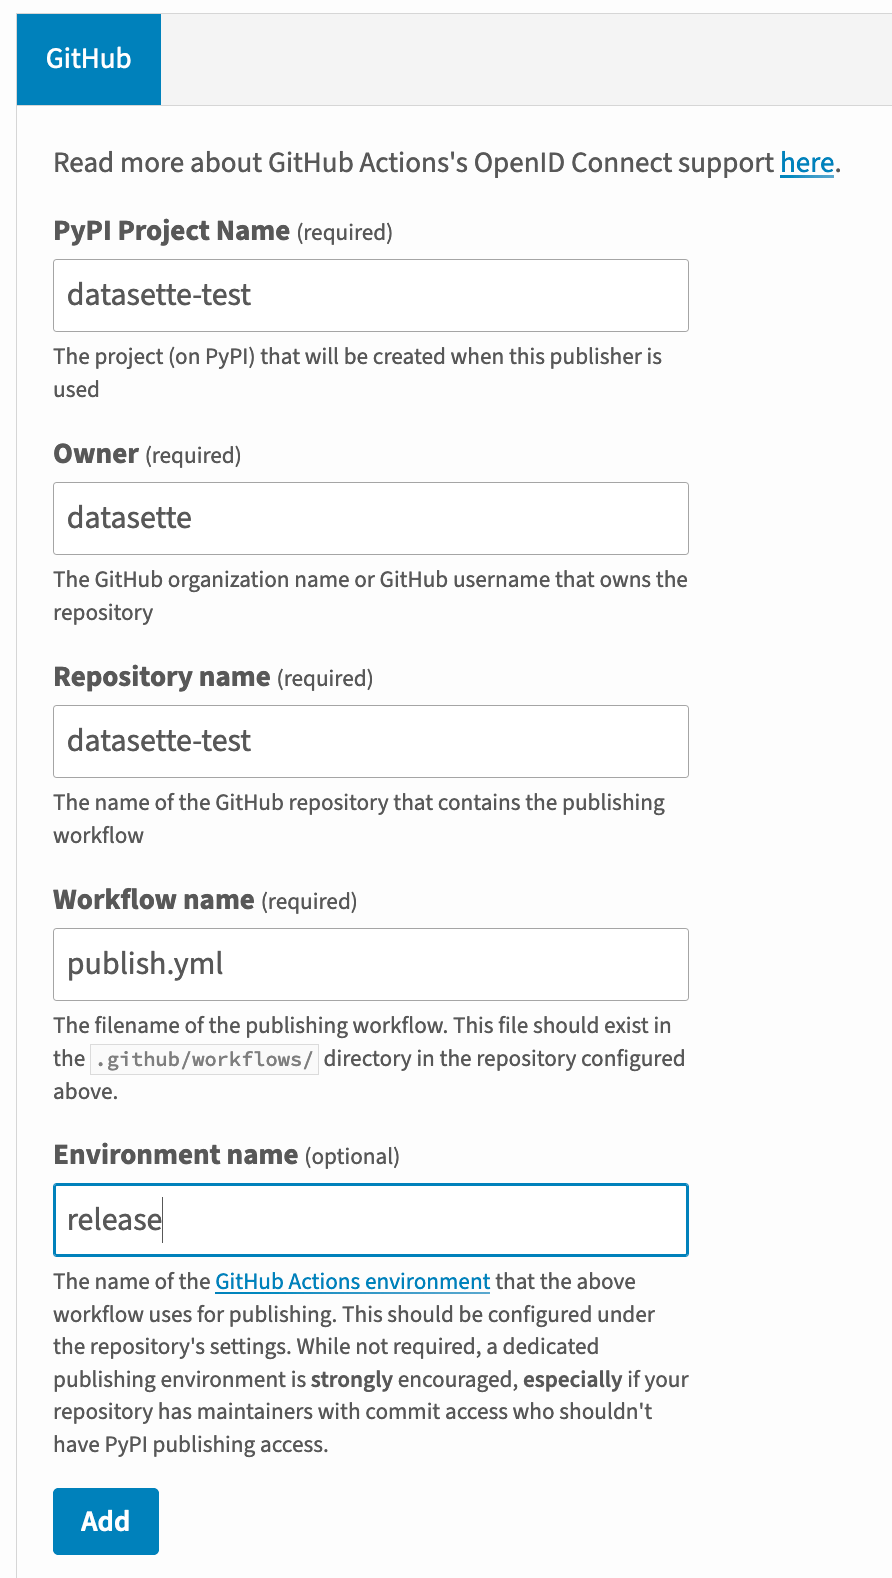 Screenshot of the create pending publisher form on PyPI. PyPI Project Name is set to datasette-test. Owner is set to datasette. Repository name is datasette-test. Workflow name is publish.yml. Environment name is release.